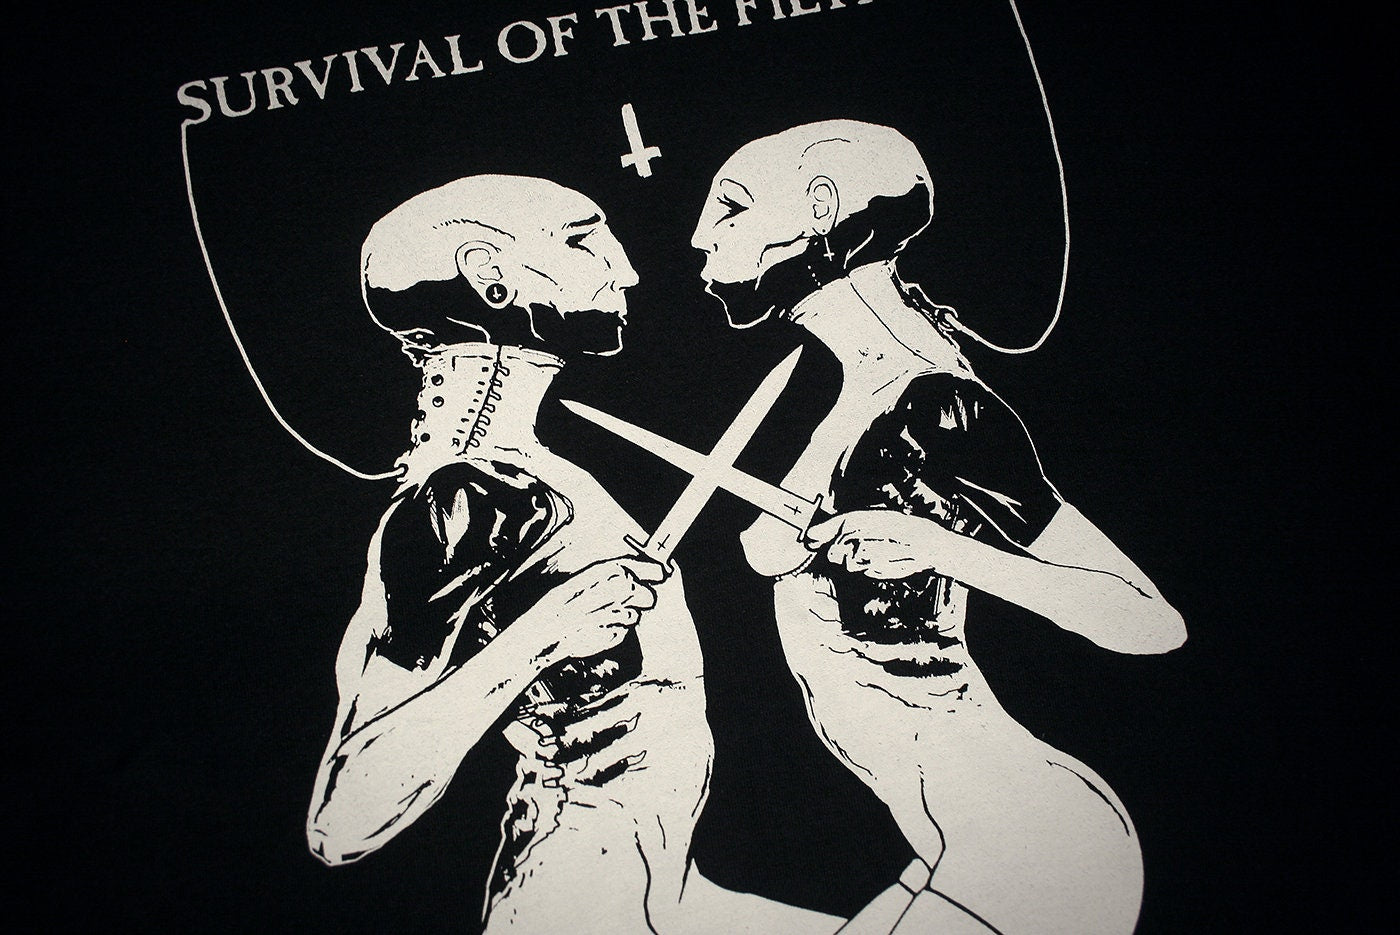 Survival of the filthiest - T-shirt